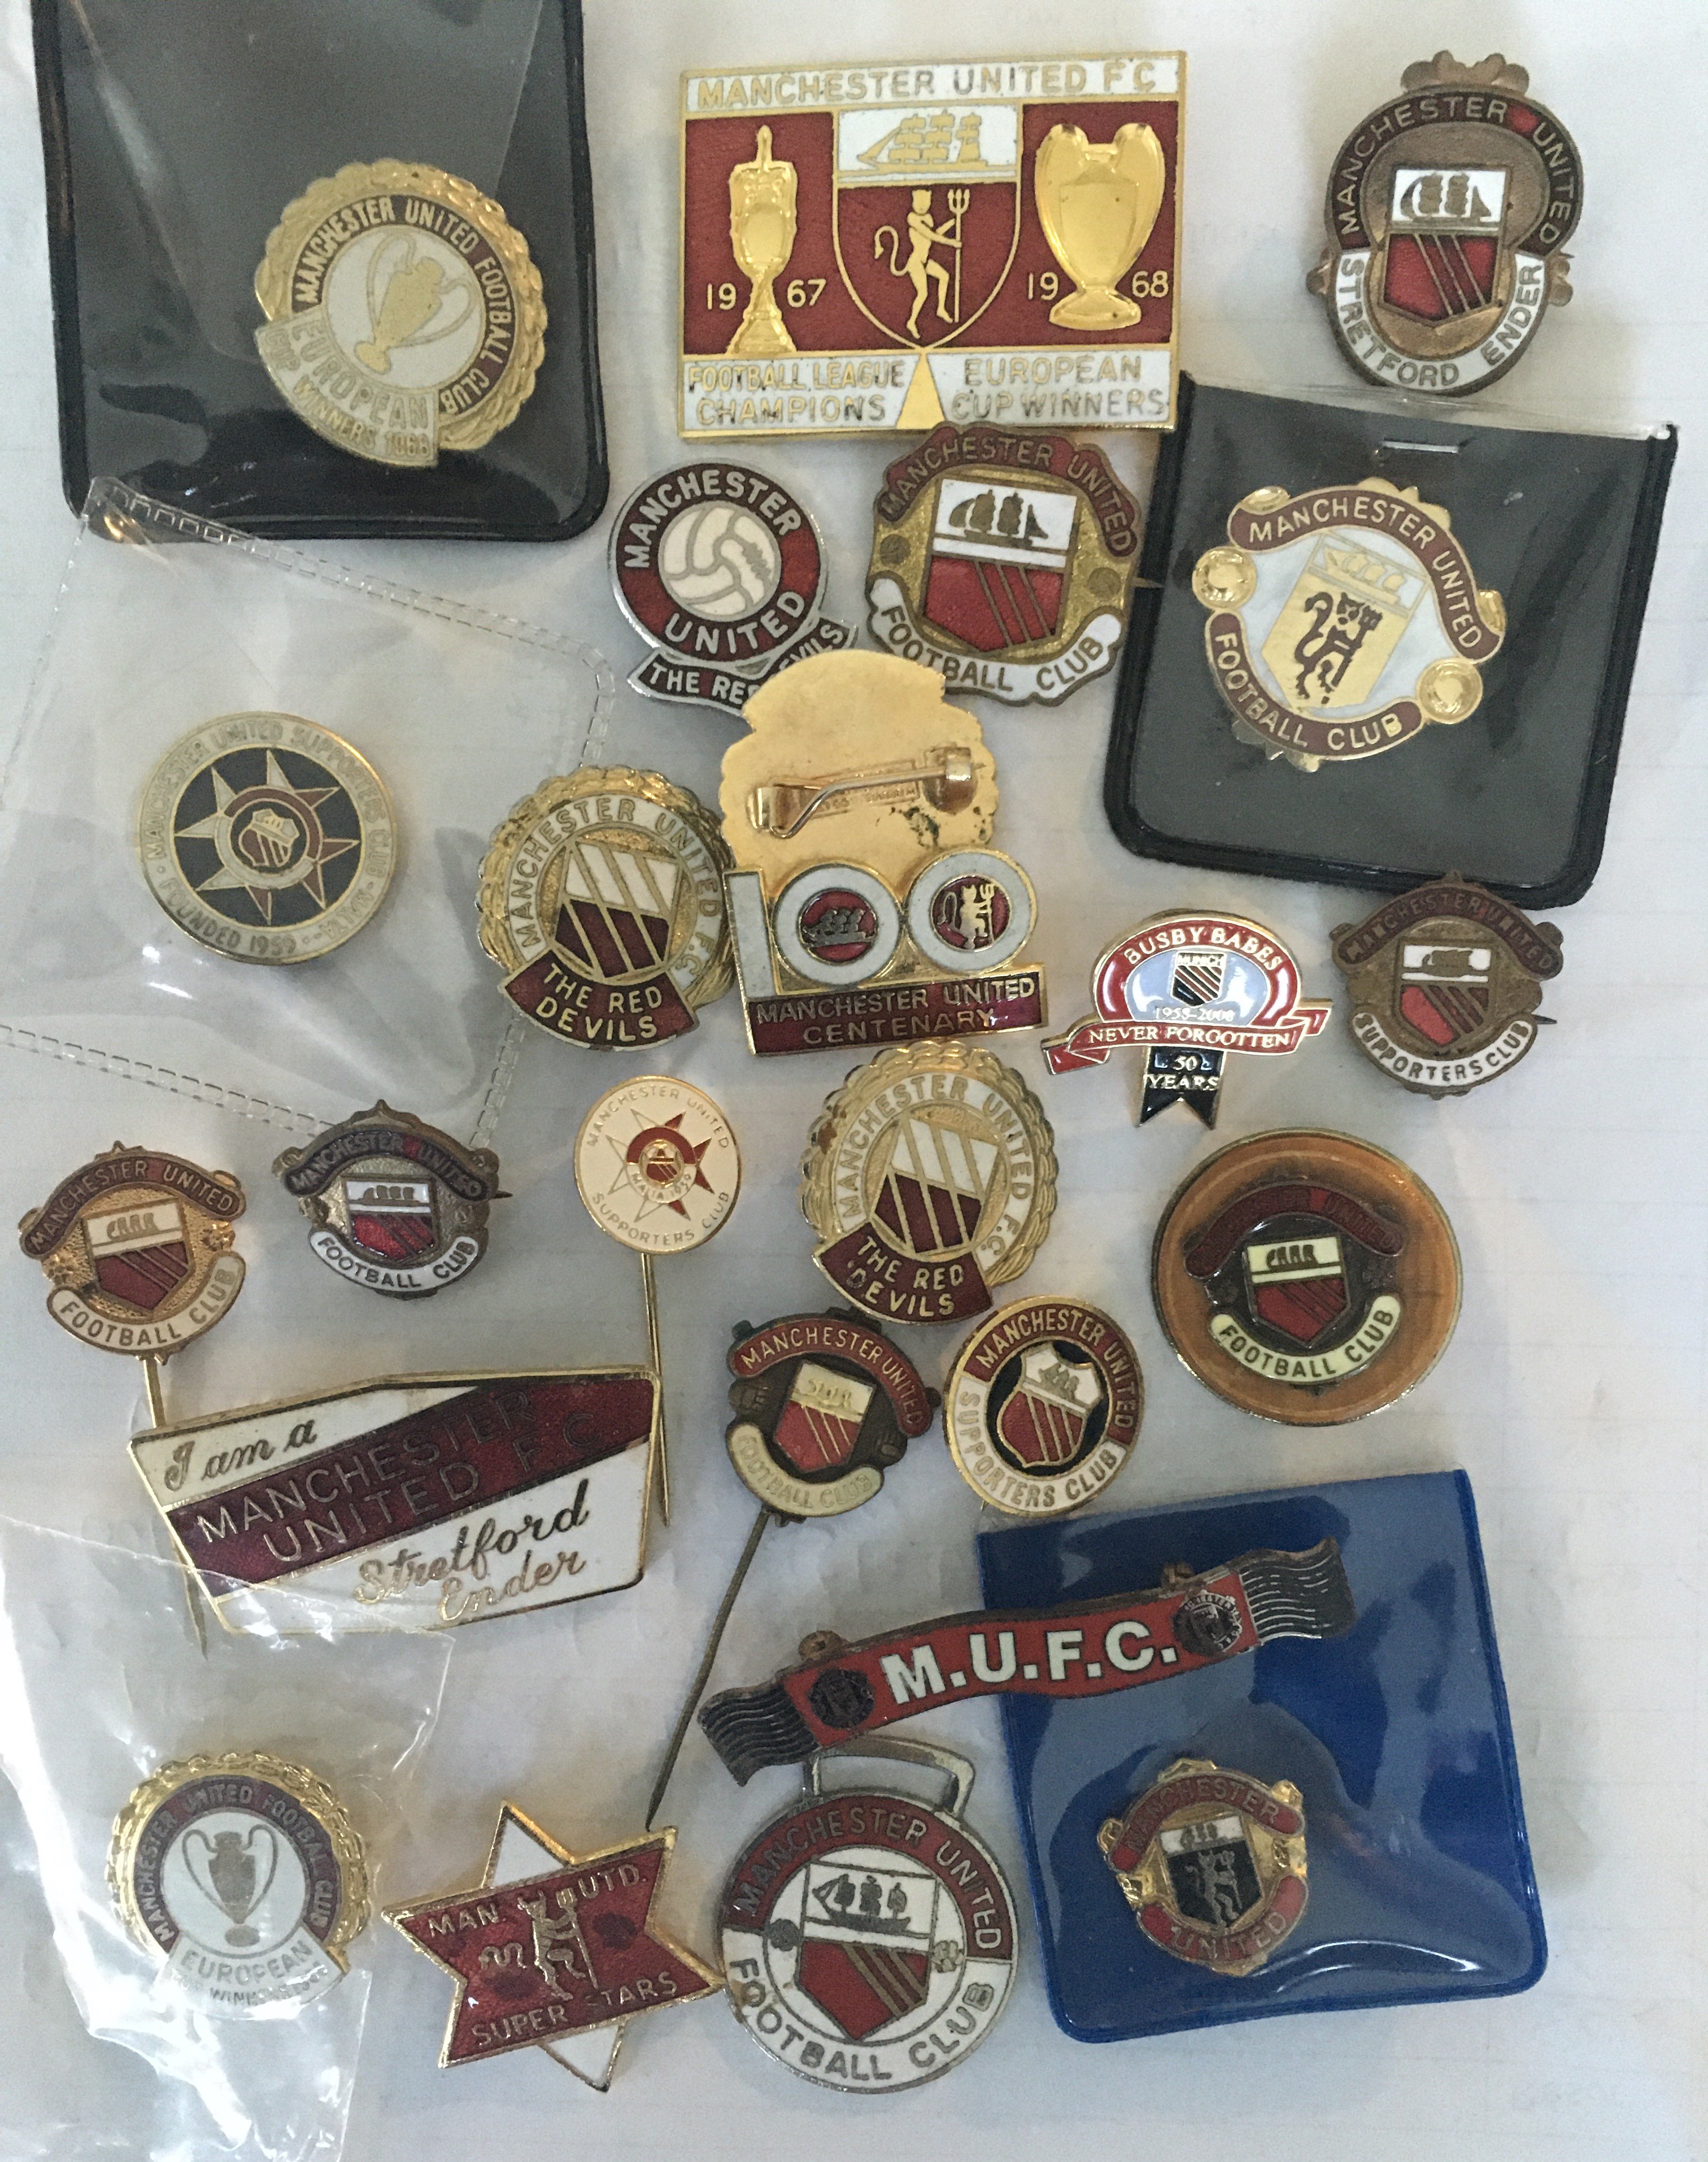 Manchester United Football Badges: Nice collection